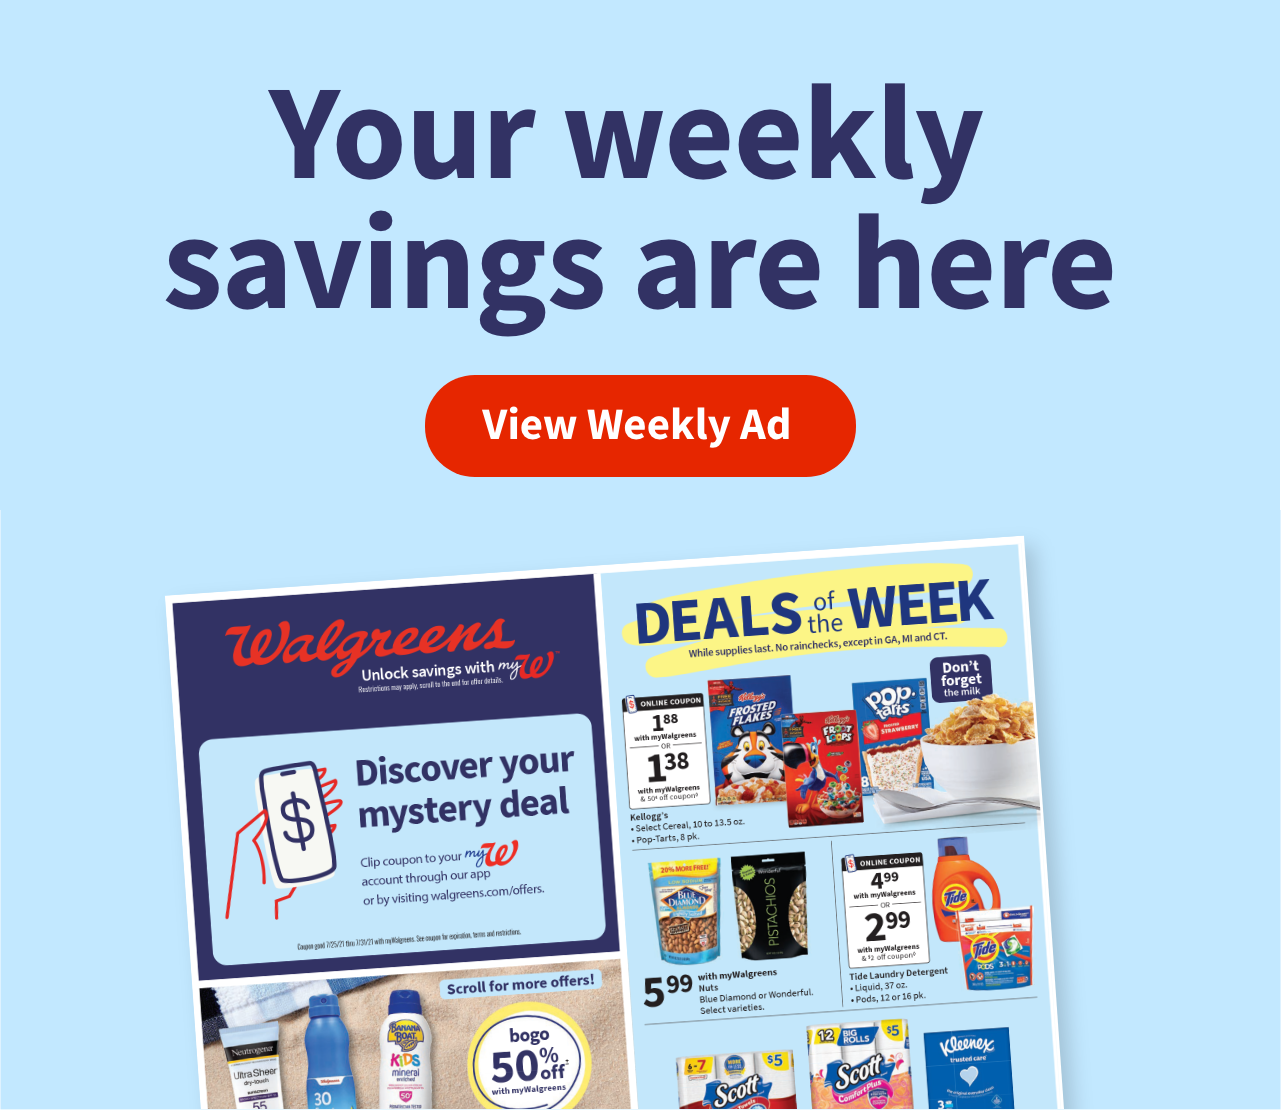 Your Weekly Ad savings are here. View Weekly Ad